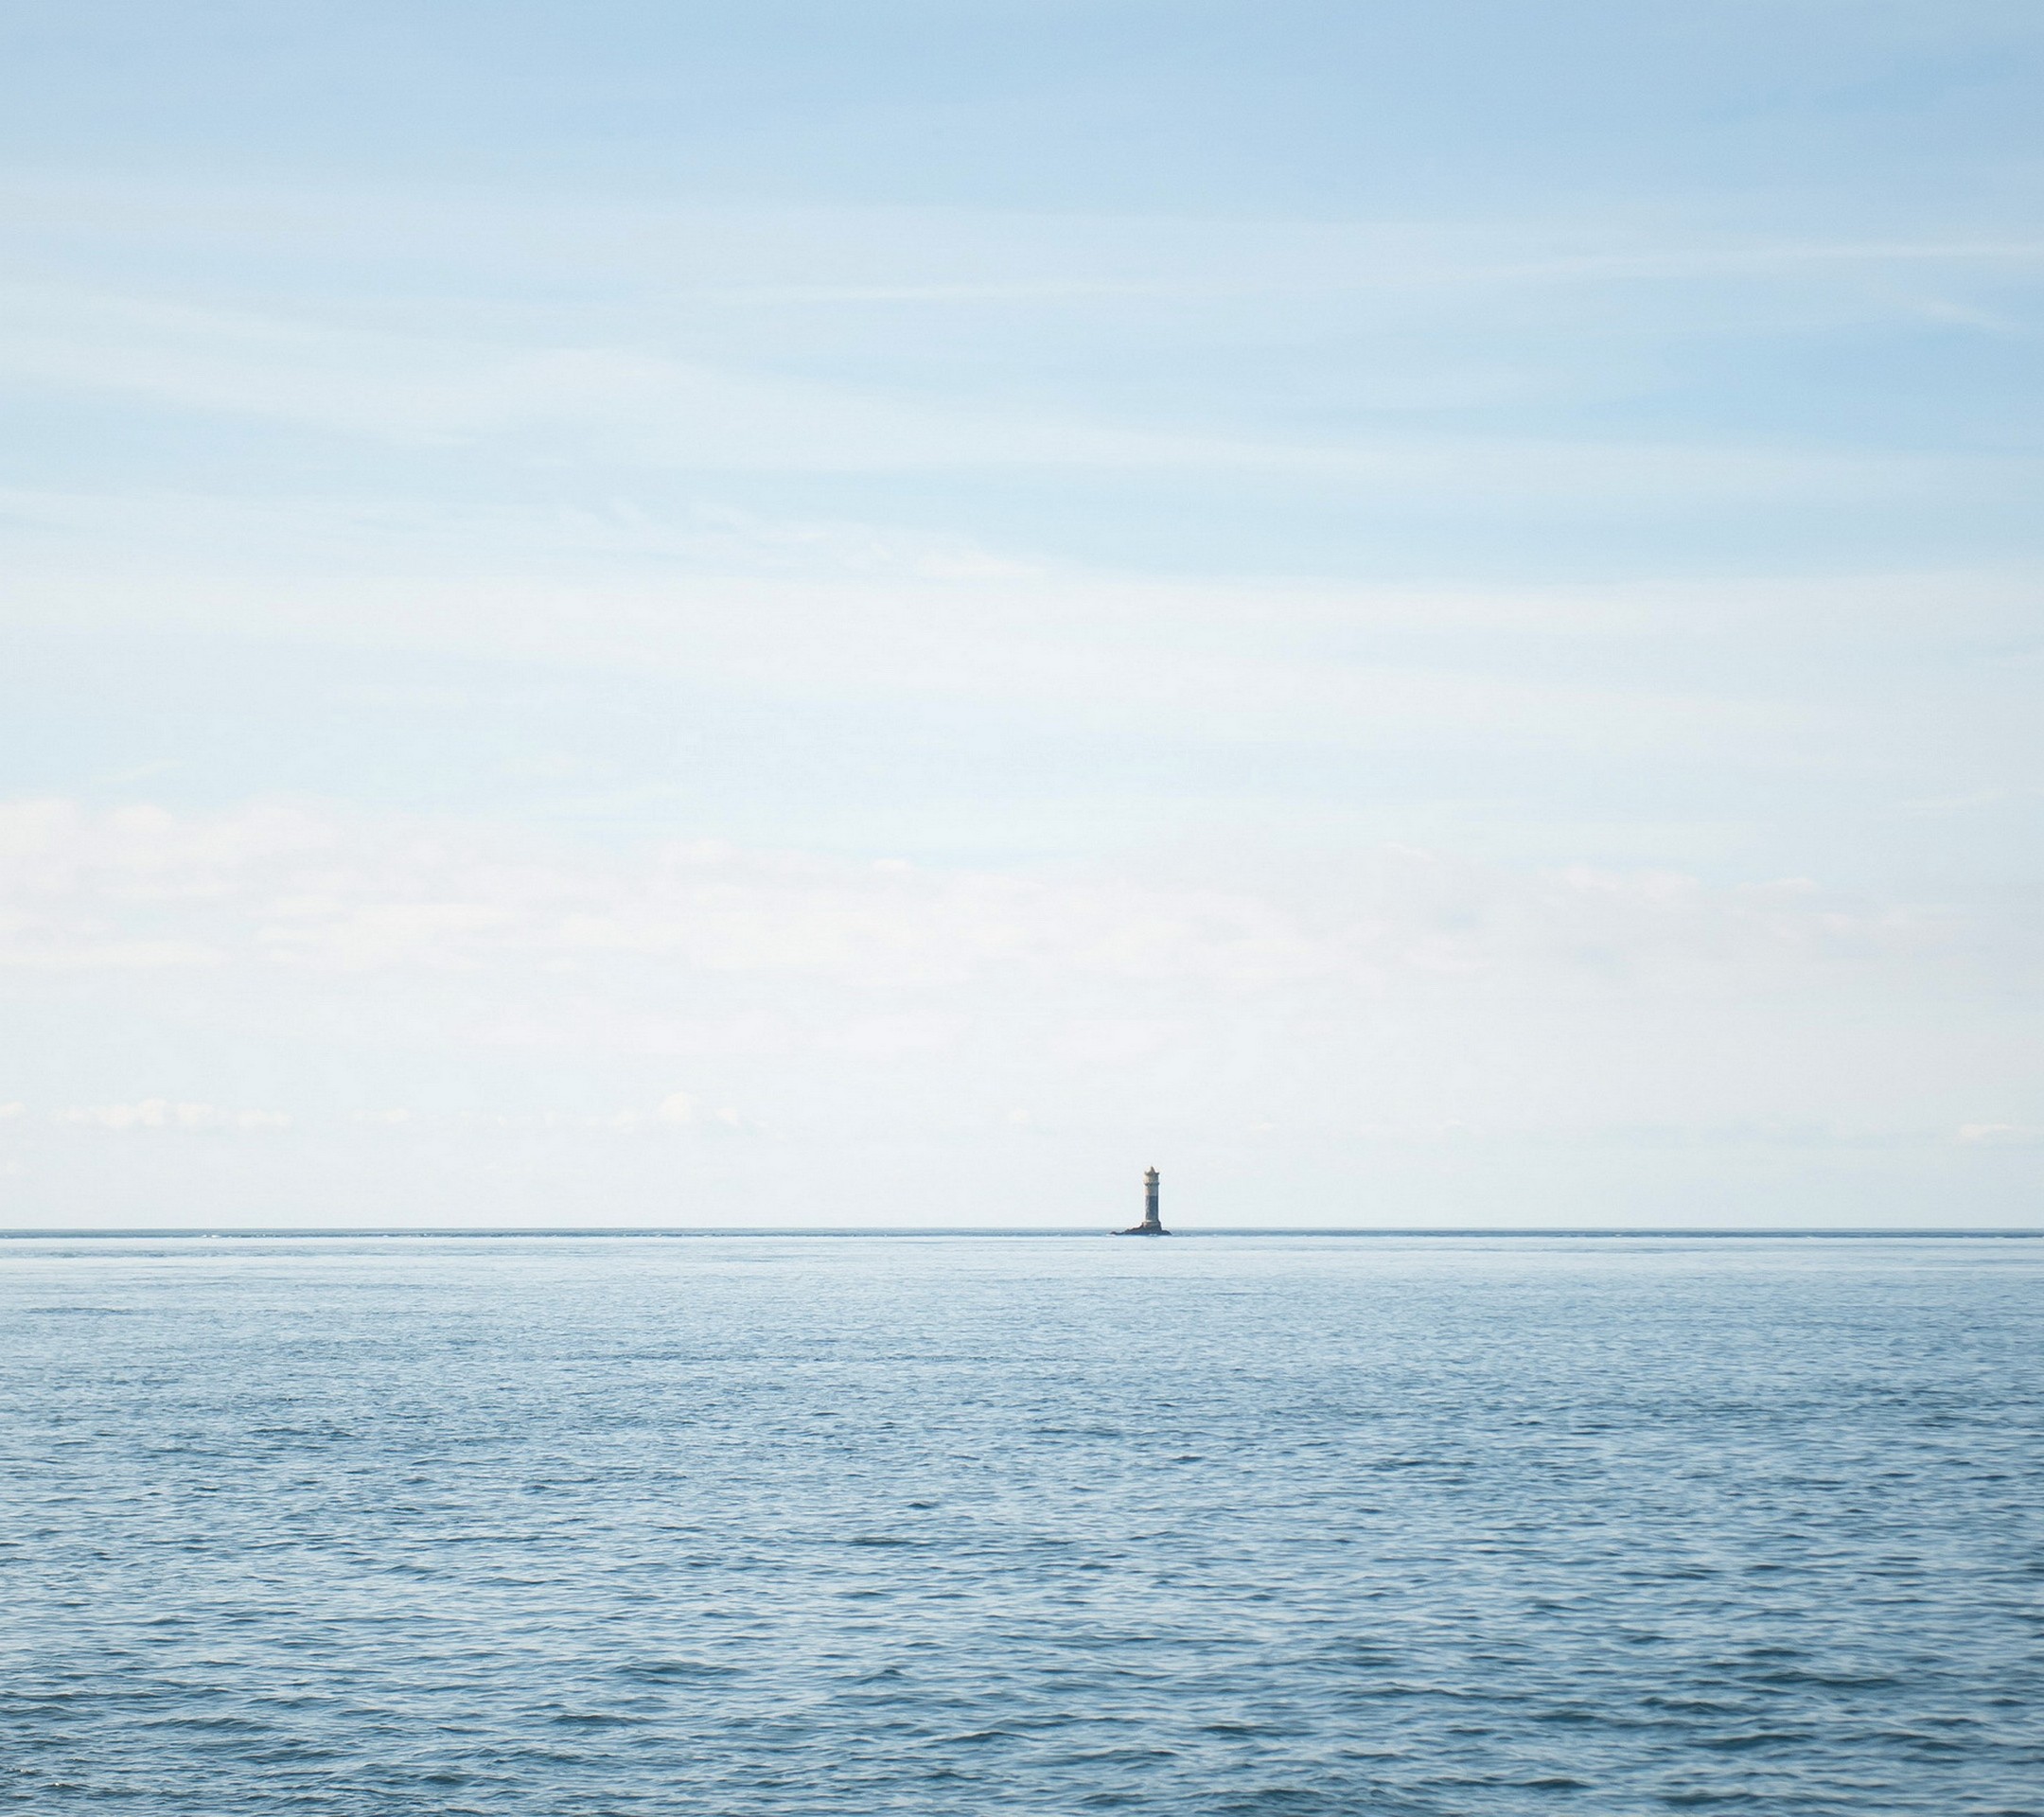 General 2160x1920 lighthouse minimalism sea sky water outdoors